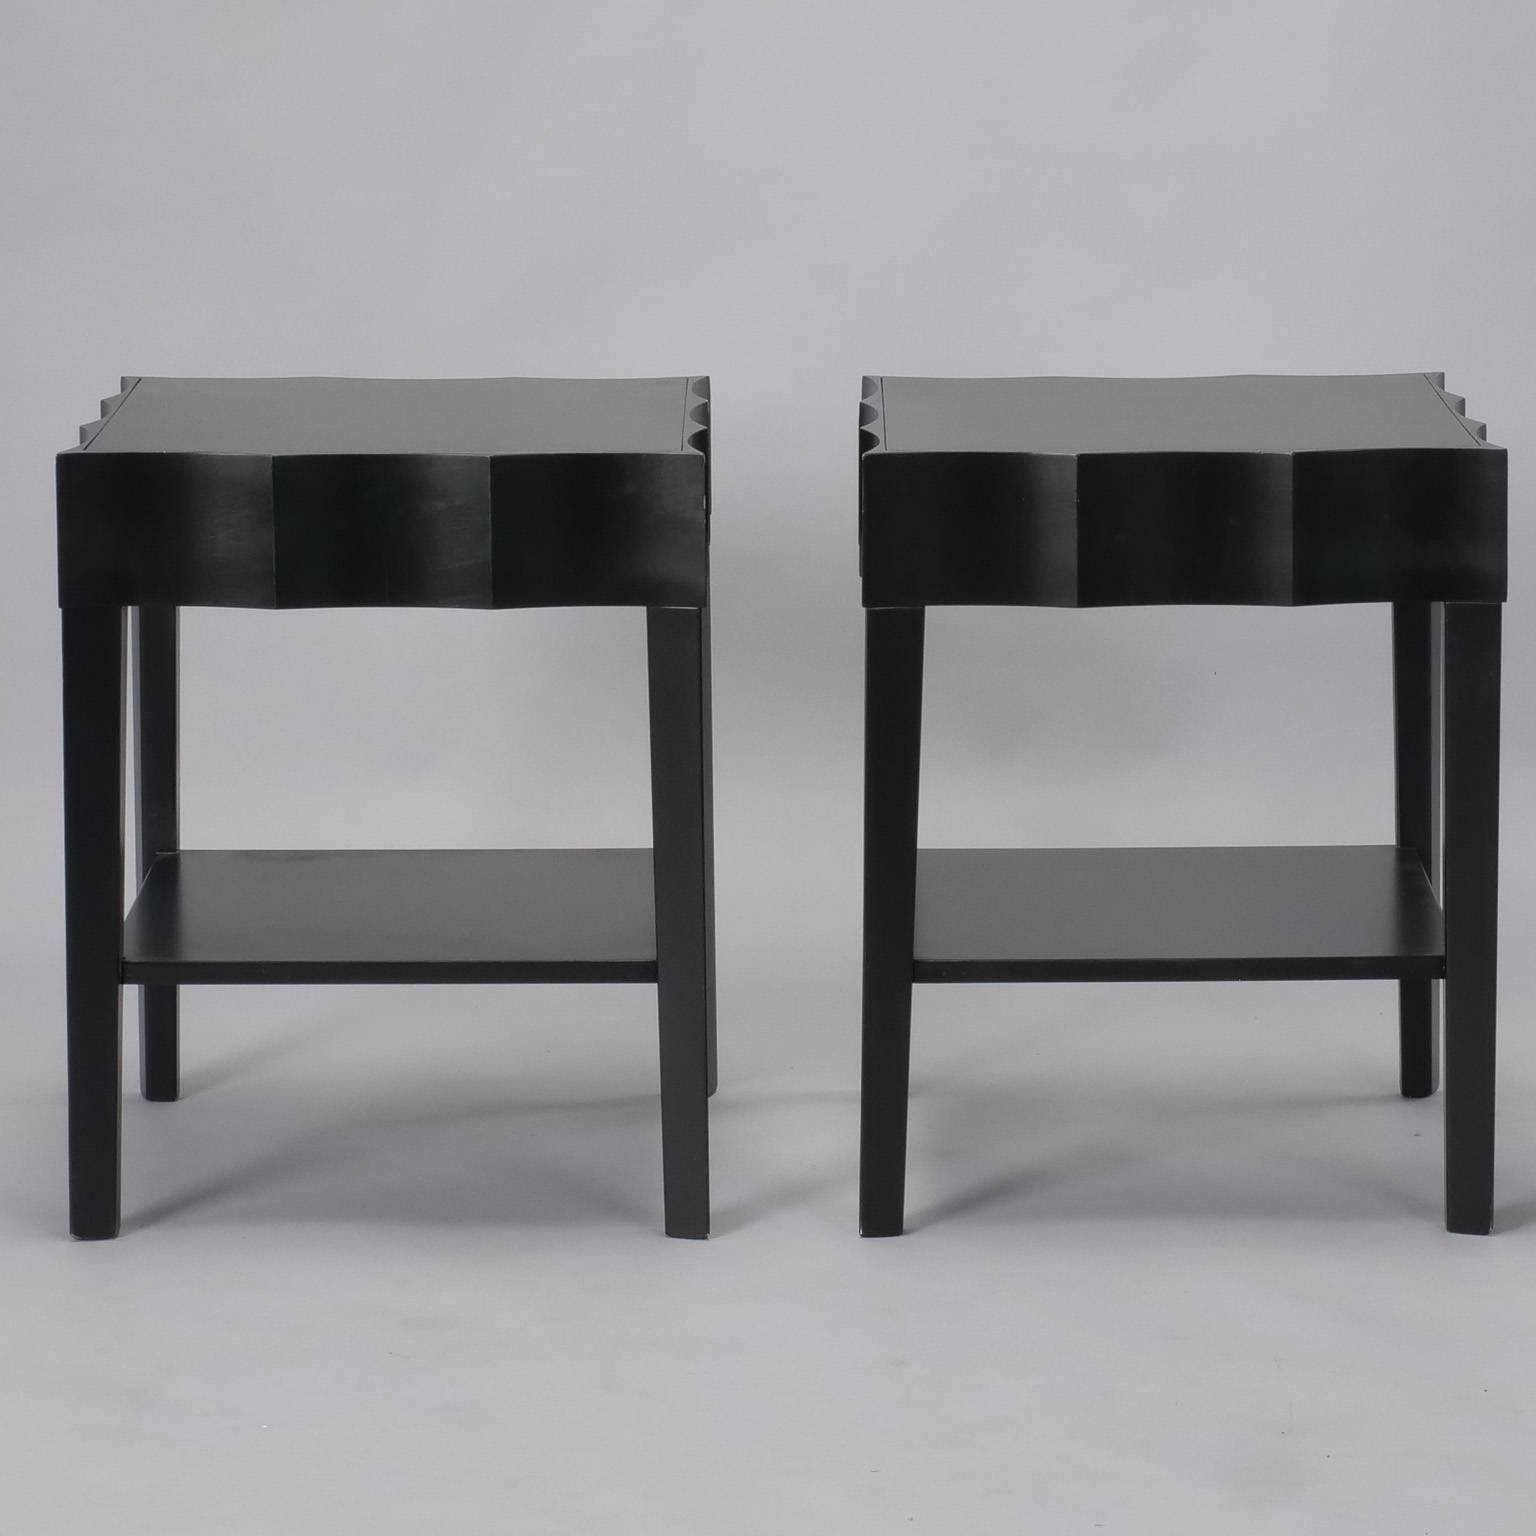 Pair of side tables have ebonized finish and scalloped front, side, and back apron panels, circa 1970s. Unknown maker, found in Italy. Sold and priced as a pair.